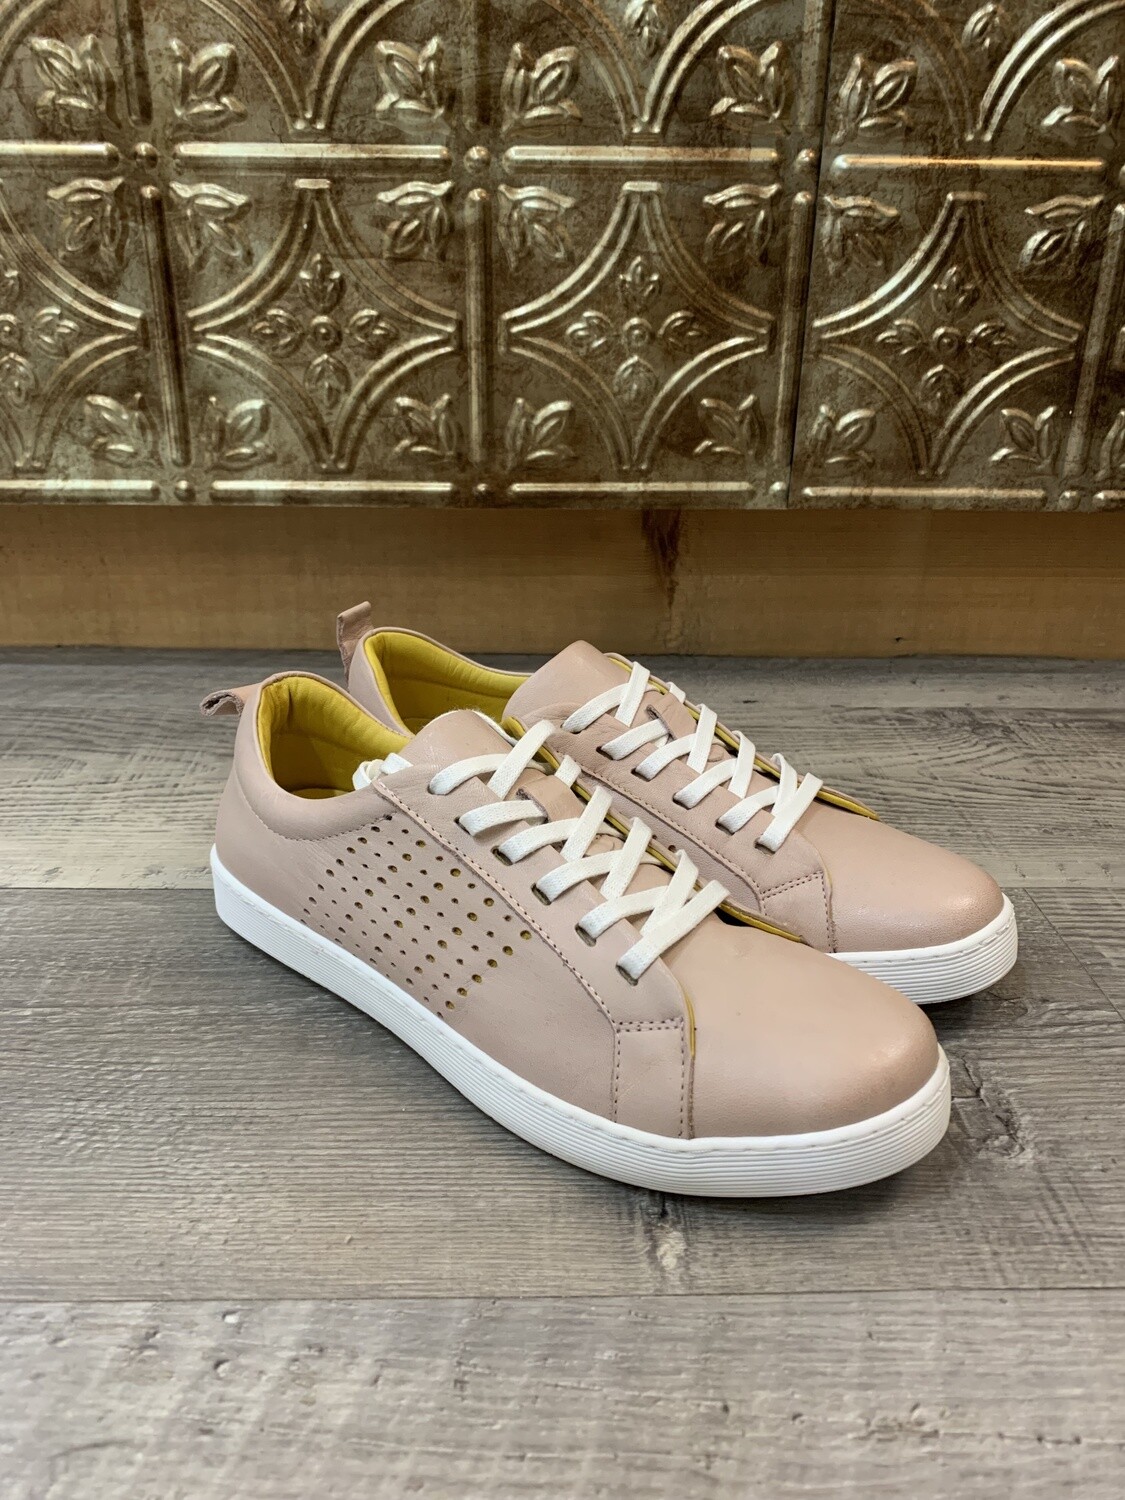 Everly Mandy Sneaker Blush Leather